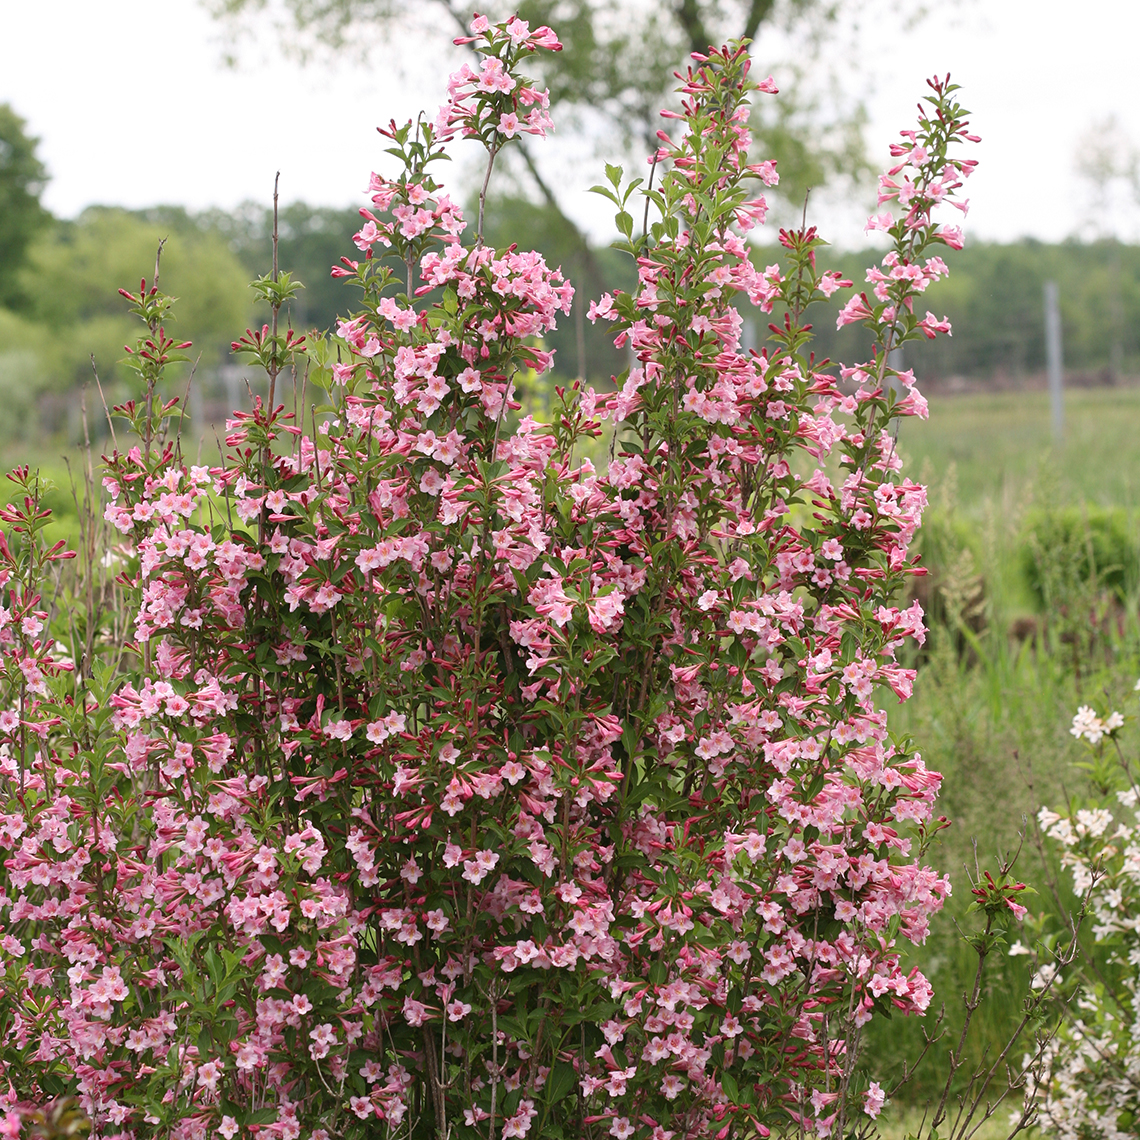 The branches of Sonic Bloom Pure Pink weigela blooming which highlight the upright habit of this plant